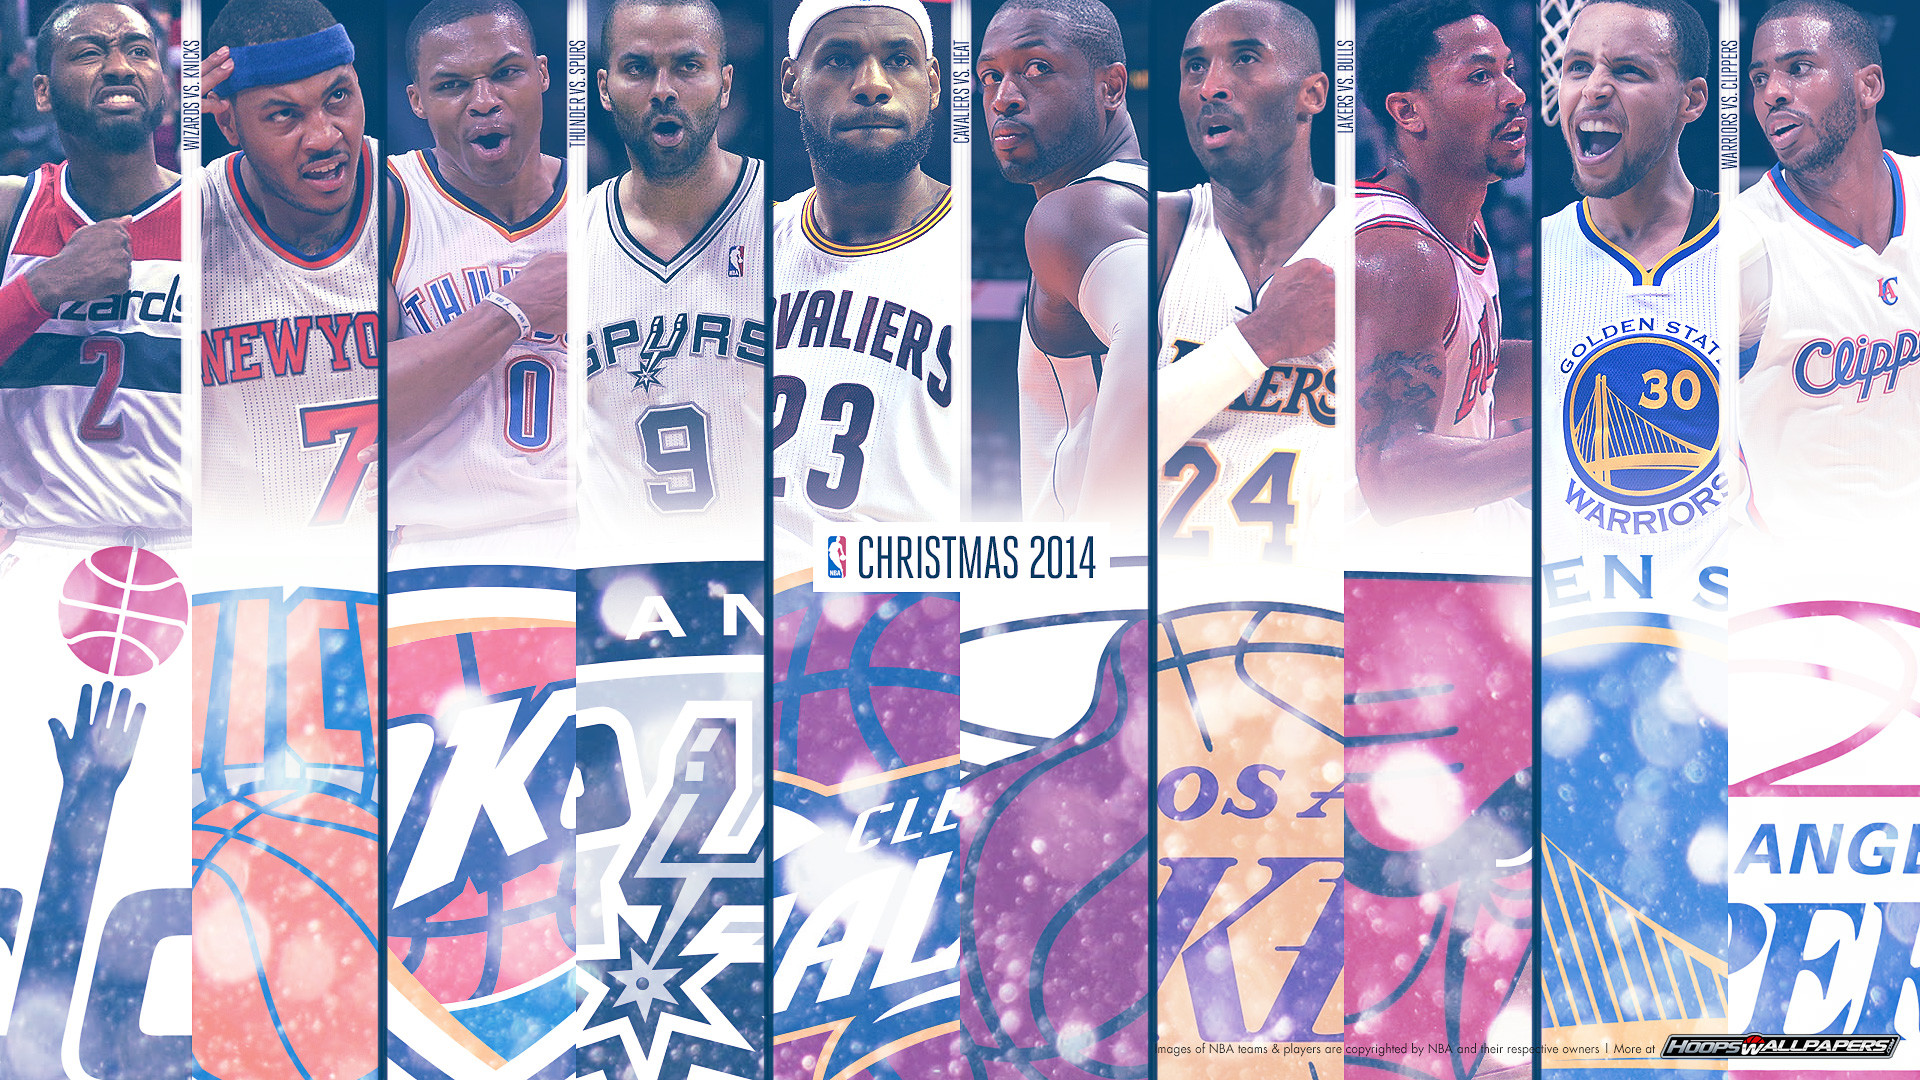 Free NBA Wallpapers At HoopsWallpapers.com Newest NBA And .